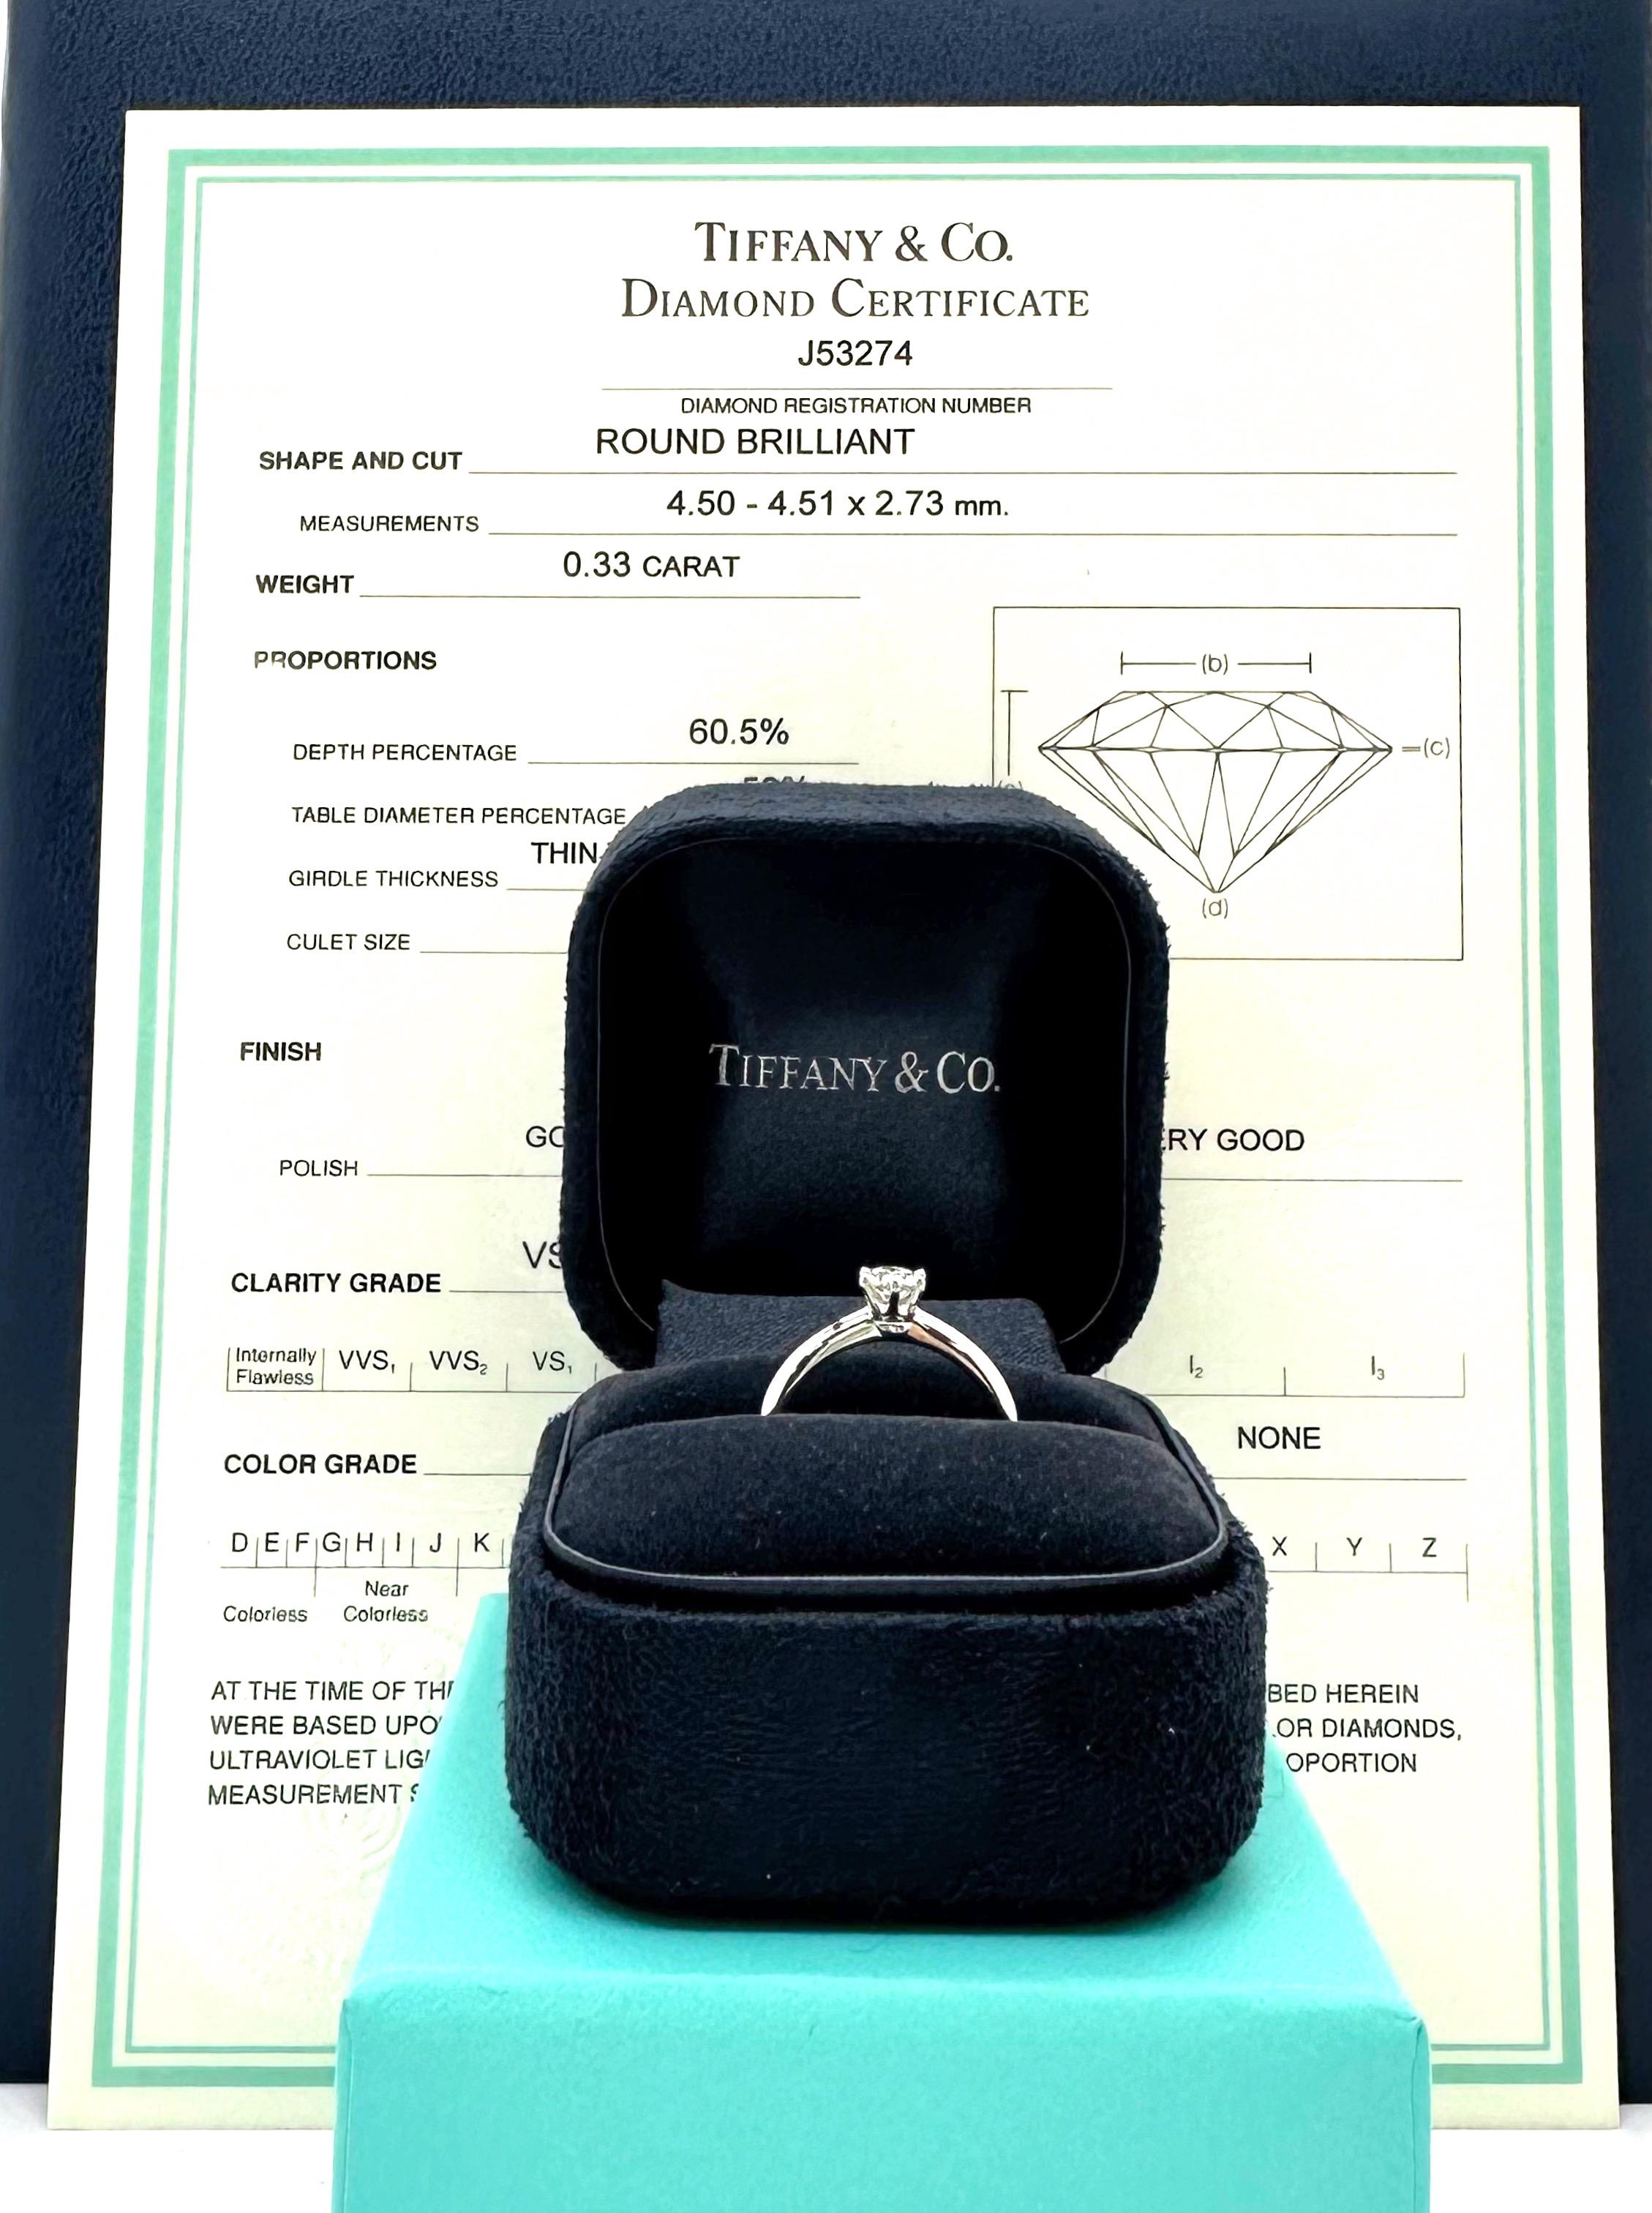 Tiffany & Co Round Brilliant Diamond Solitaire Engagement Ring
Style:  Solitaire 
Ref. number:  J53274
Metal:  Platinum Pt950
Size:  5 sizable
TCW:  0.33 cts
Main Diamond:  Round Brilliant Diamond
Color & Clarity:  H - VS1
Hallmark:  TIFFANY&CO